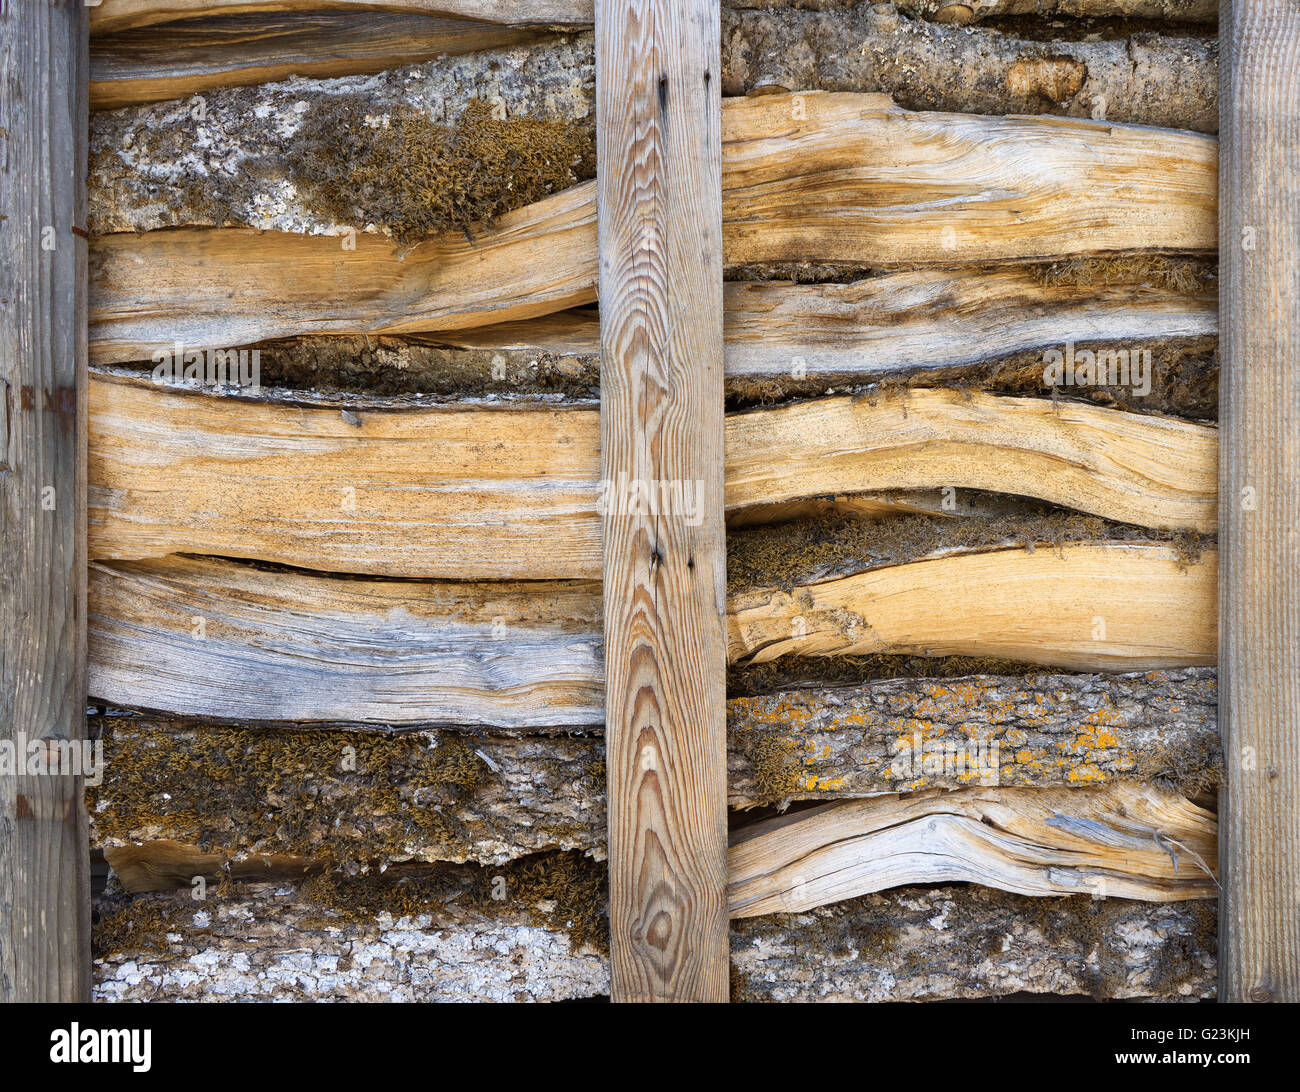 Firewood in an open wooden rack Stock Photo